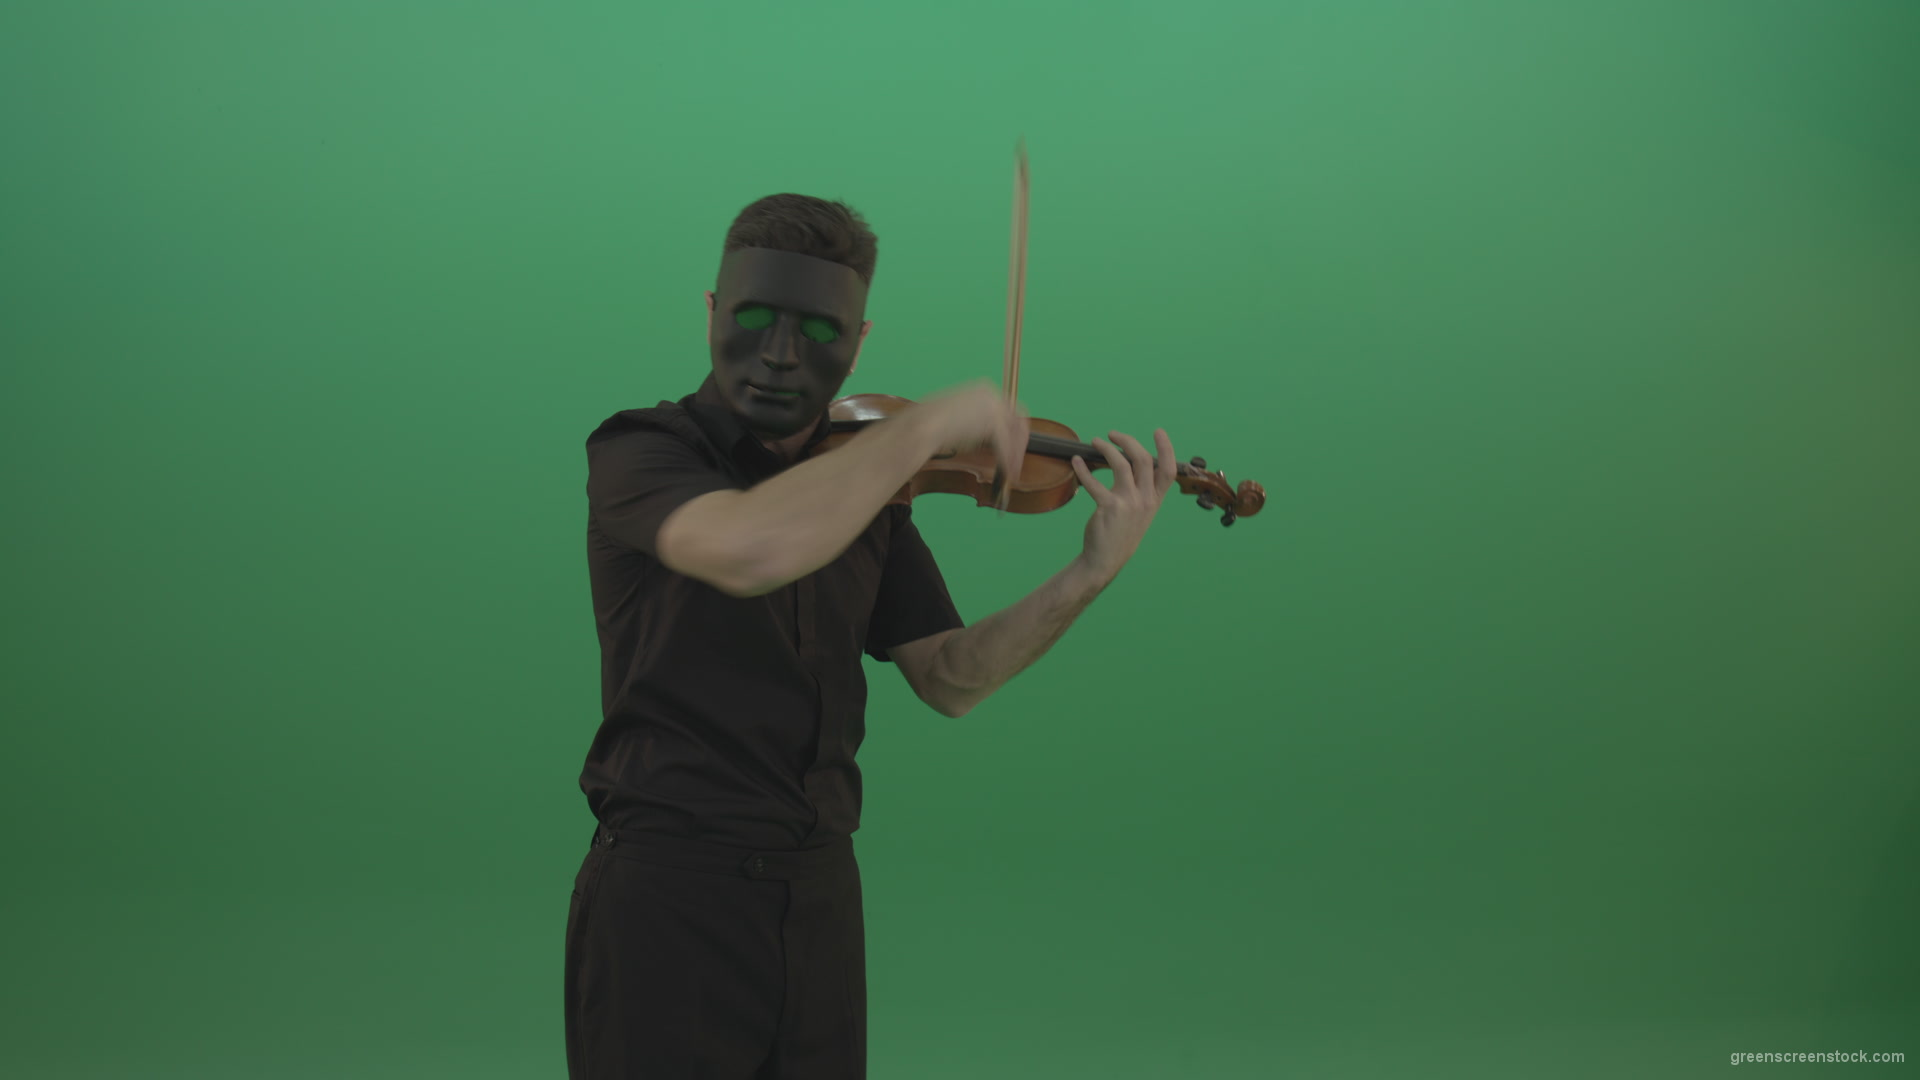 Man-in-black-wear-and-mask-play-violin-fiddle-strings-gothic-dark-music-isolated-on-green-screen_009 Green Screen Stock